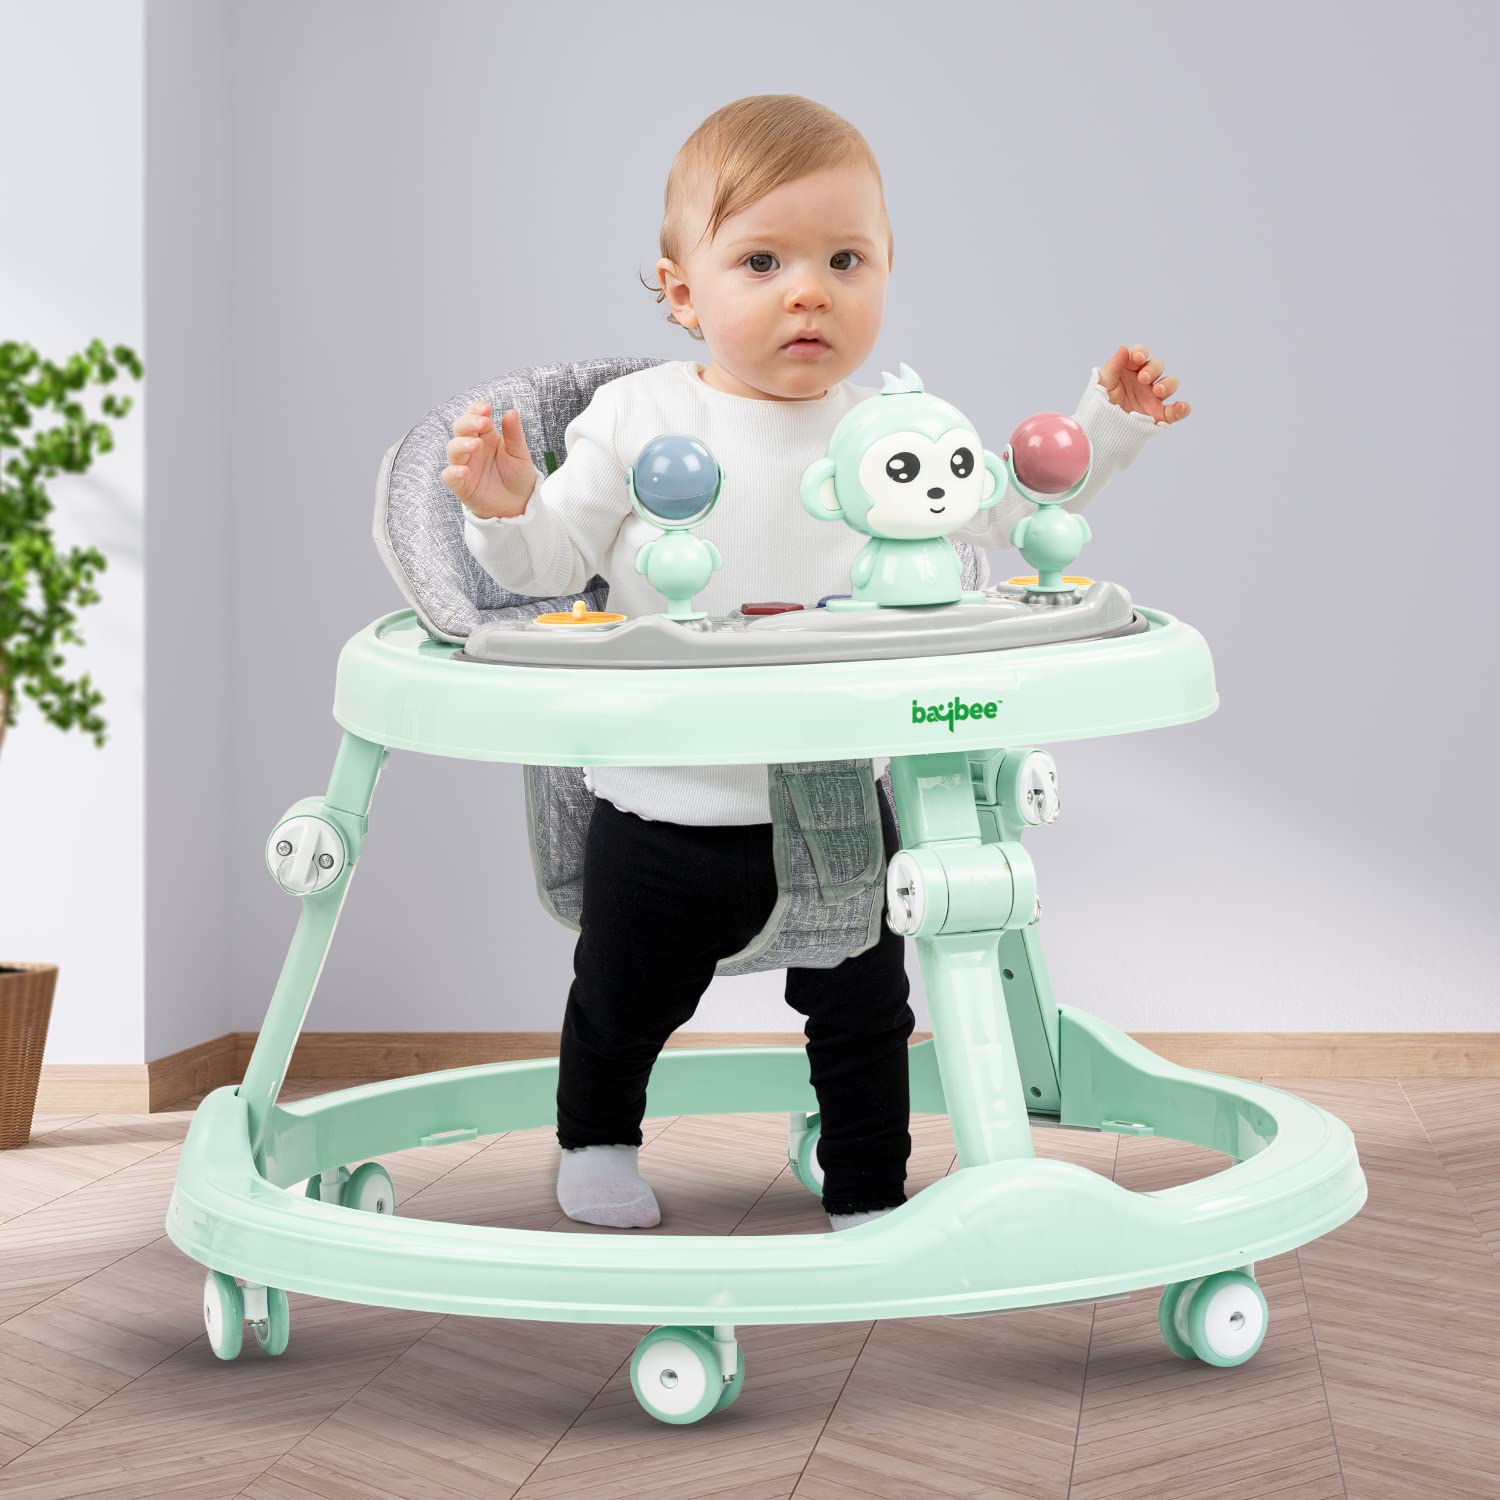 Baybee Drono Baby Walker for Kids, Round Kids Walker with 4 Seat Height Adjustable | Activity Walker for Baby with with Food Tray & Musical Toy Bar | Walker for Baby 6-18 Months Boys Girls (Blue)